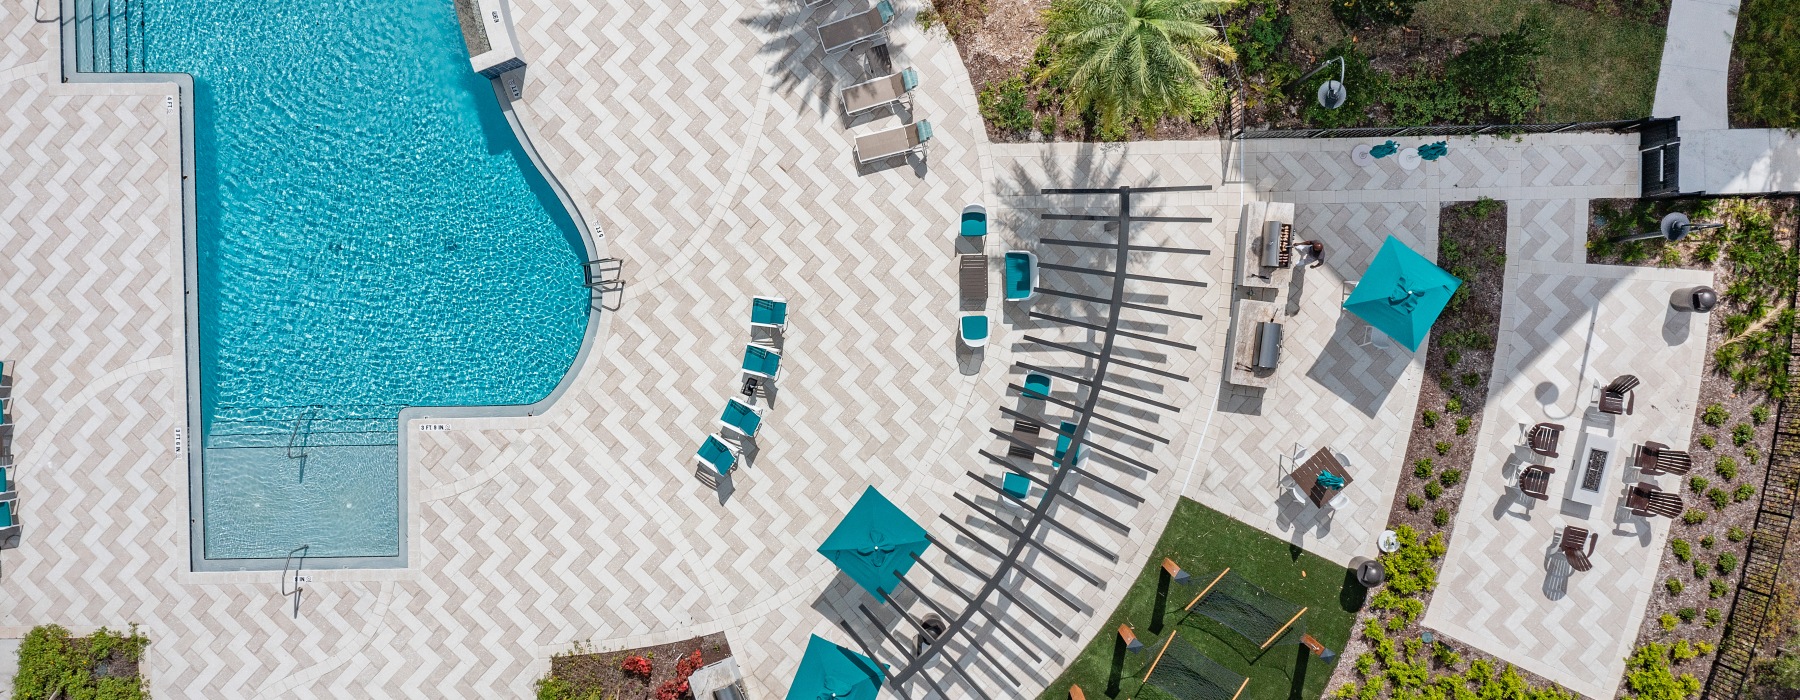 Arial view of poolside area and furniture